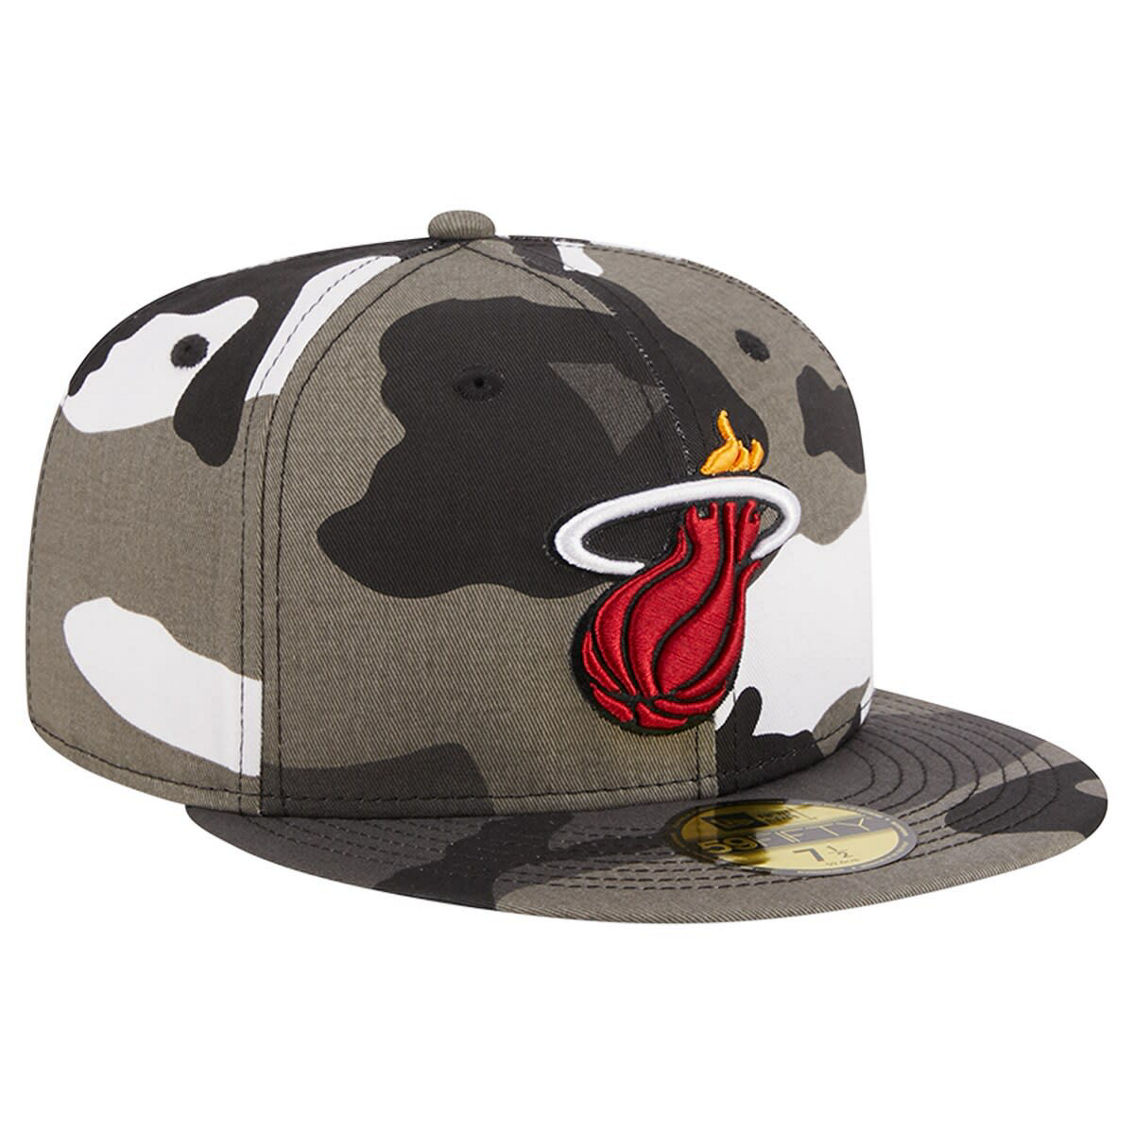 New Era Men's Miami Heat Snow Camo 59FIFTY Fitted Hat - Image 4 of 4